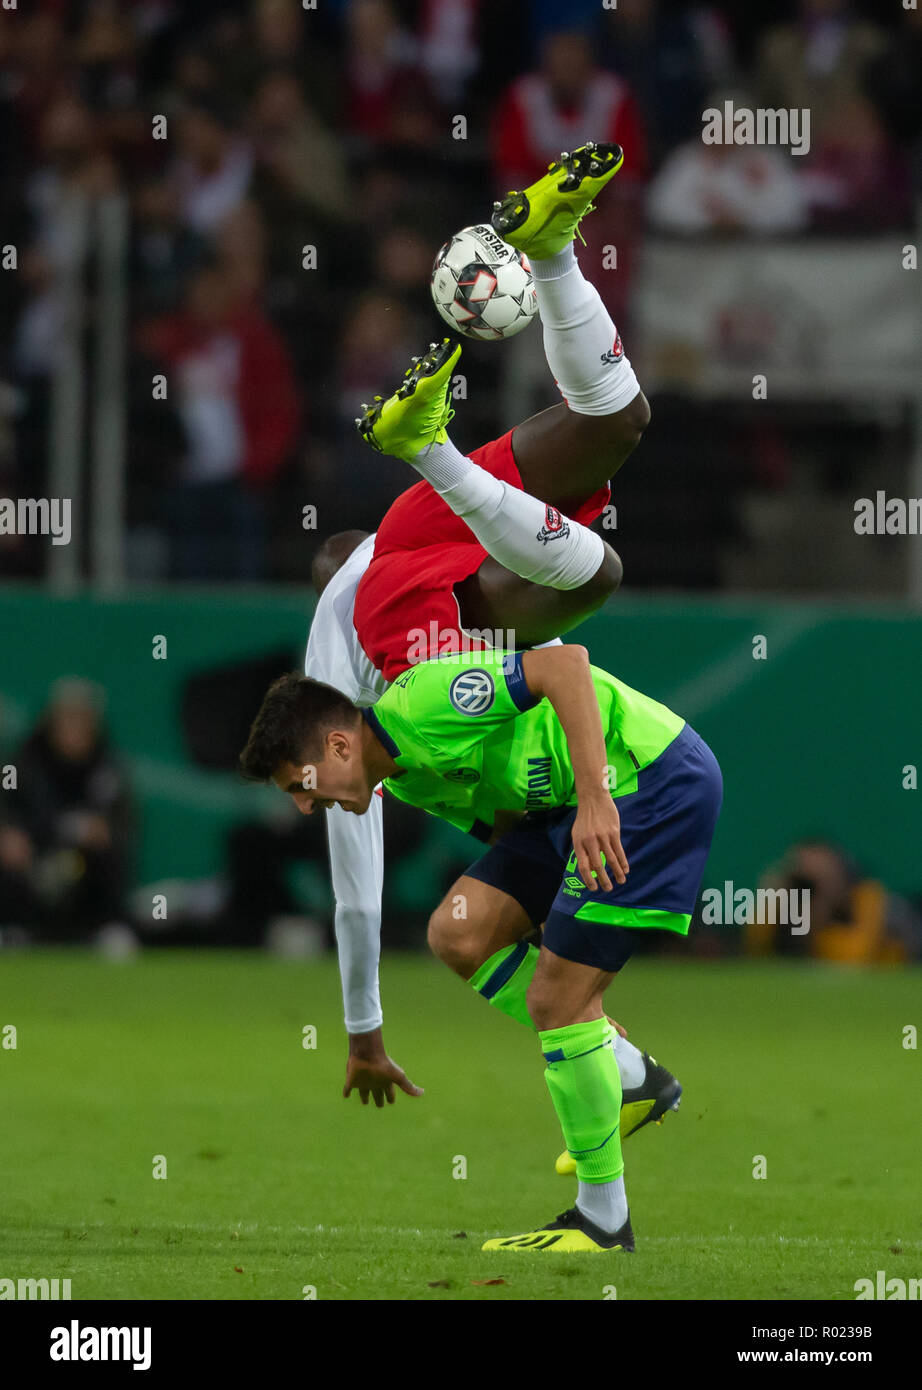 Cologne, Germany October 31 2018, DFB Pokal, FC Koeln - FC Schalke 04: Sehrou Guirassy (Koeln), Alessandro Andre Schoepf (S04) in competition.                 Credit: Juergen Schwarz/Alamy Live News    DFB REGULATIONS PROHIBIT ANY USE OF PHOTOGRAPHS AS IMAGE SEQUENCES AND/OR QUASI-VIDEO Credit: Juergen Schwarz/Alamy Live News Stock Photo